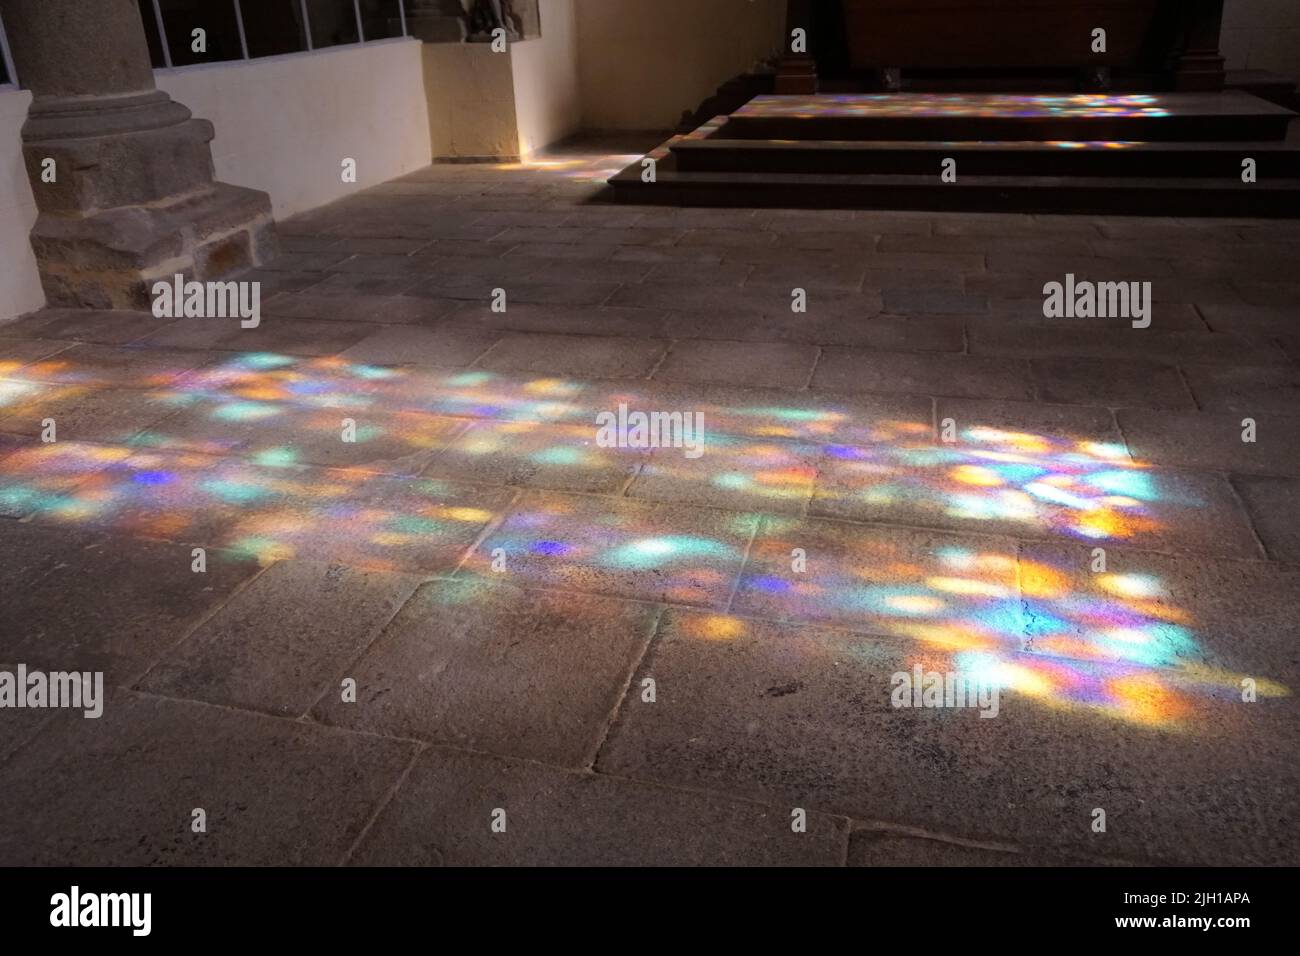 sun rays through colorful stained glass windows of a church appearing on the stone ground Stock Photo